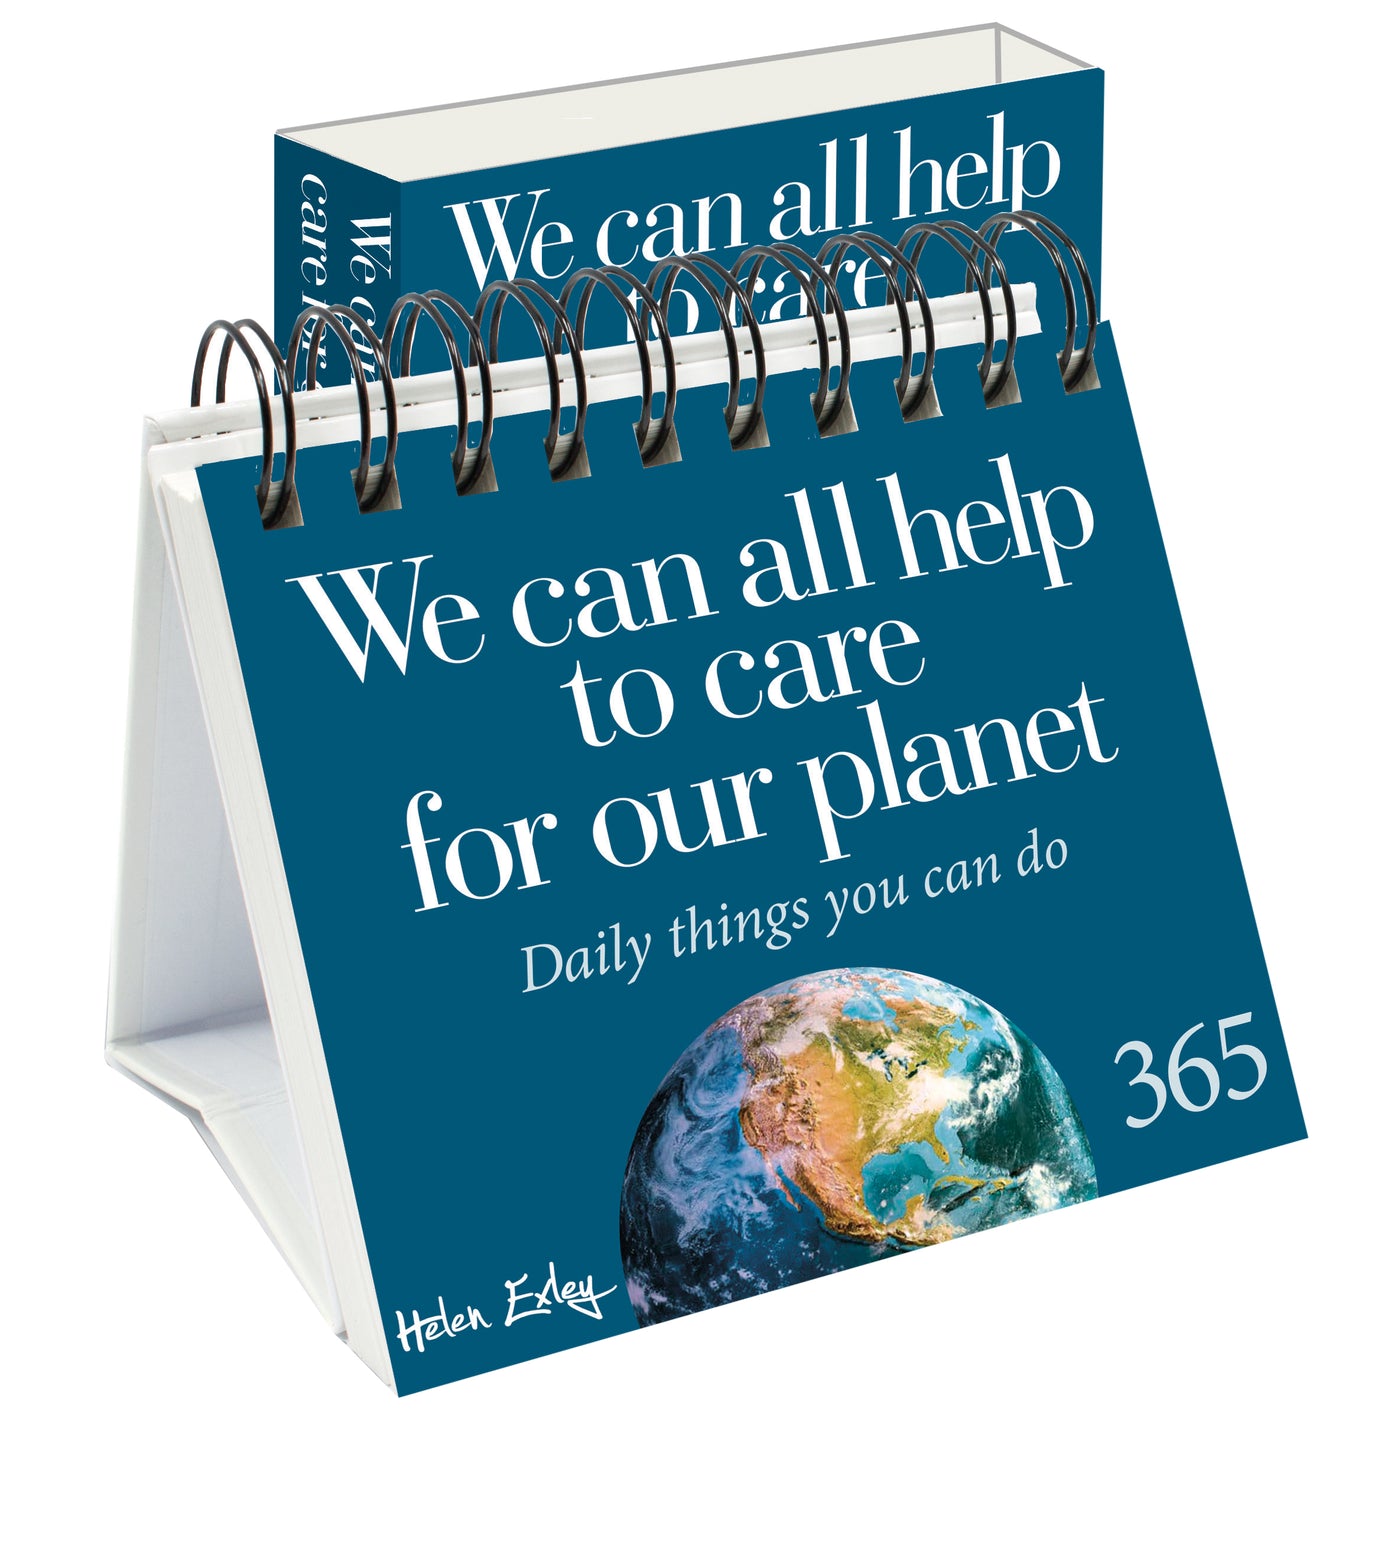 365 We can all help to care for our planet - Daily things you can do